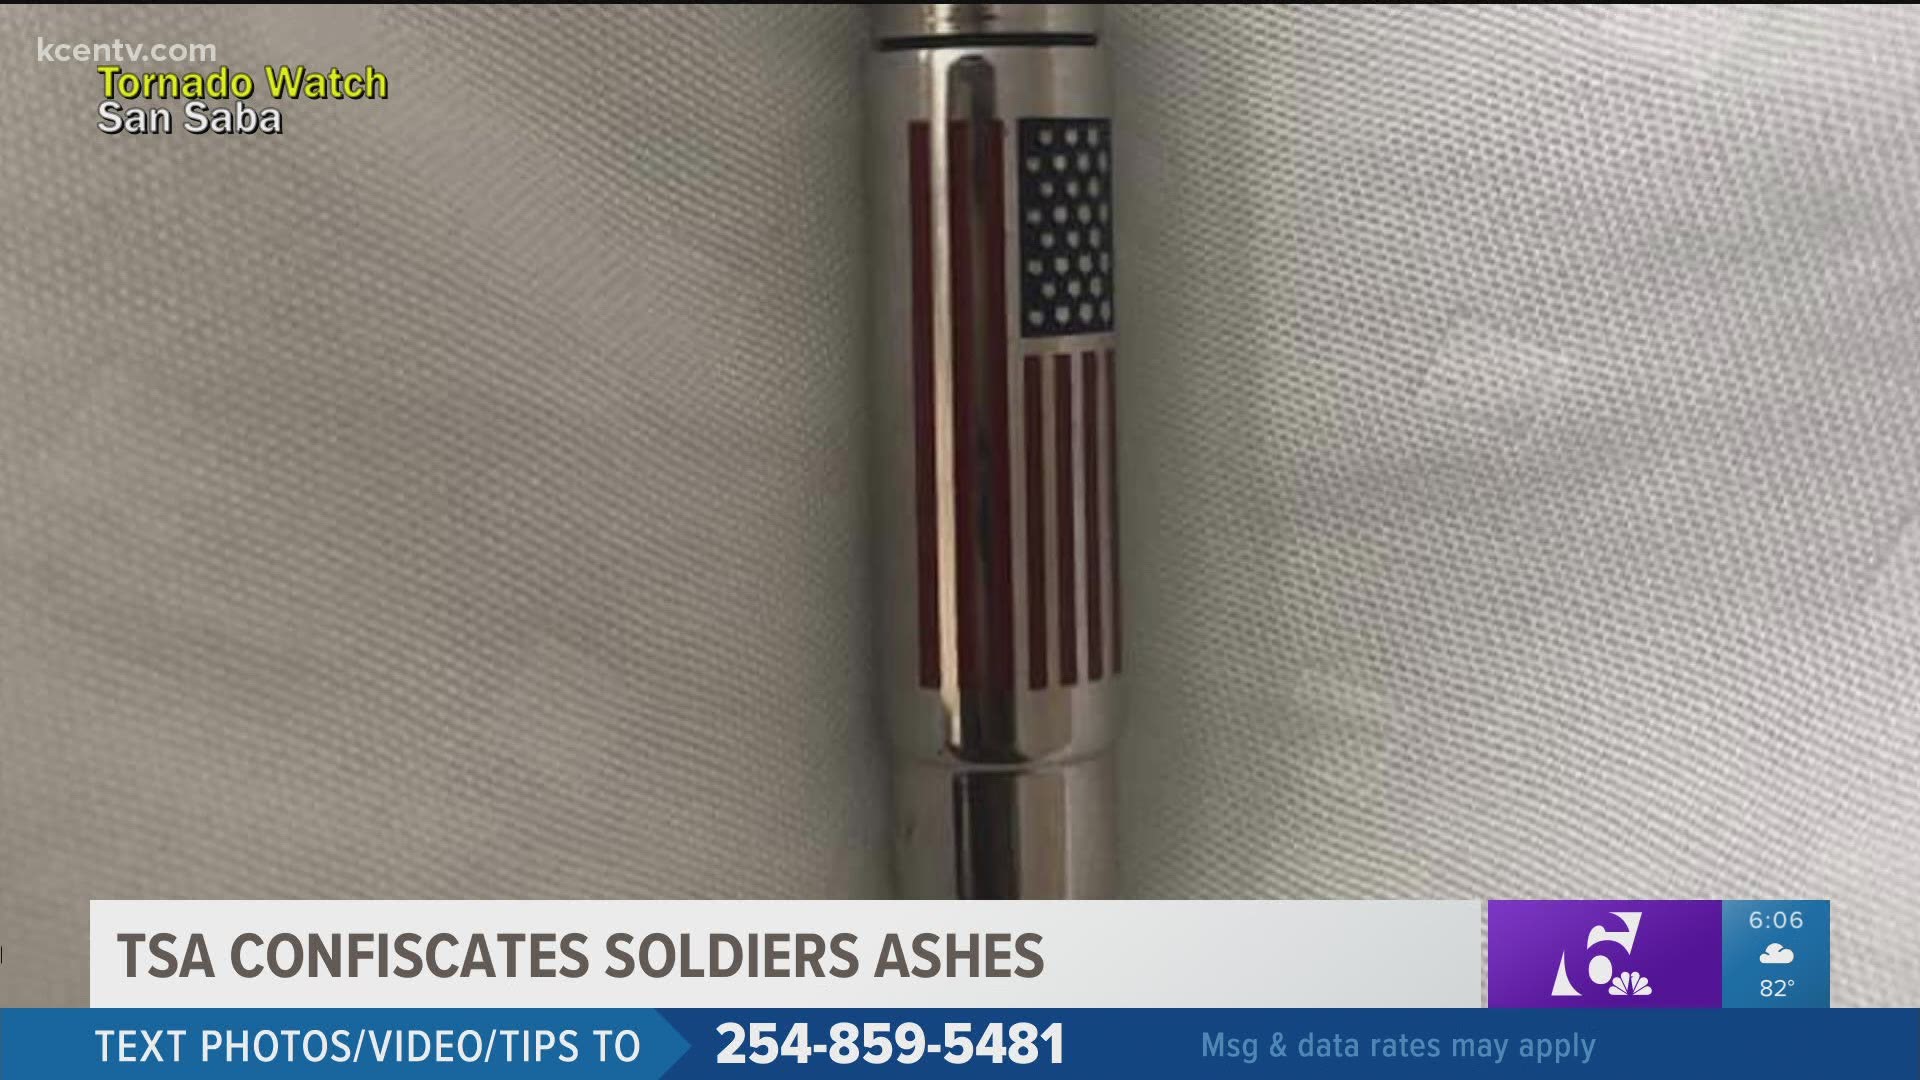 Retired soldier George Tirado fears he may not be able to get the meaningful token containing his best friend's ashes back